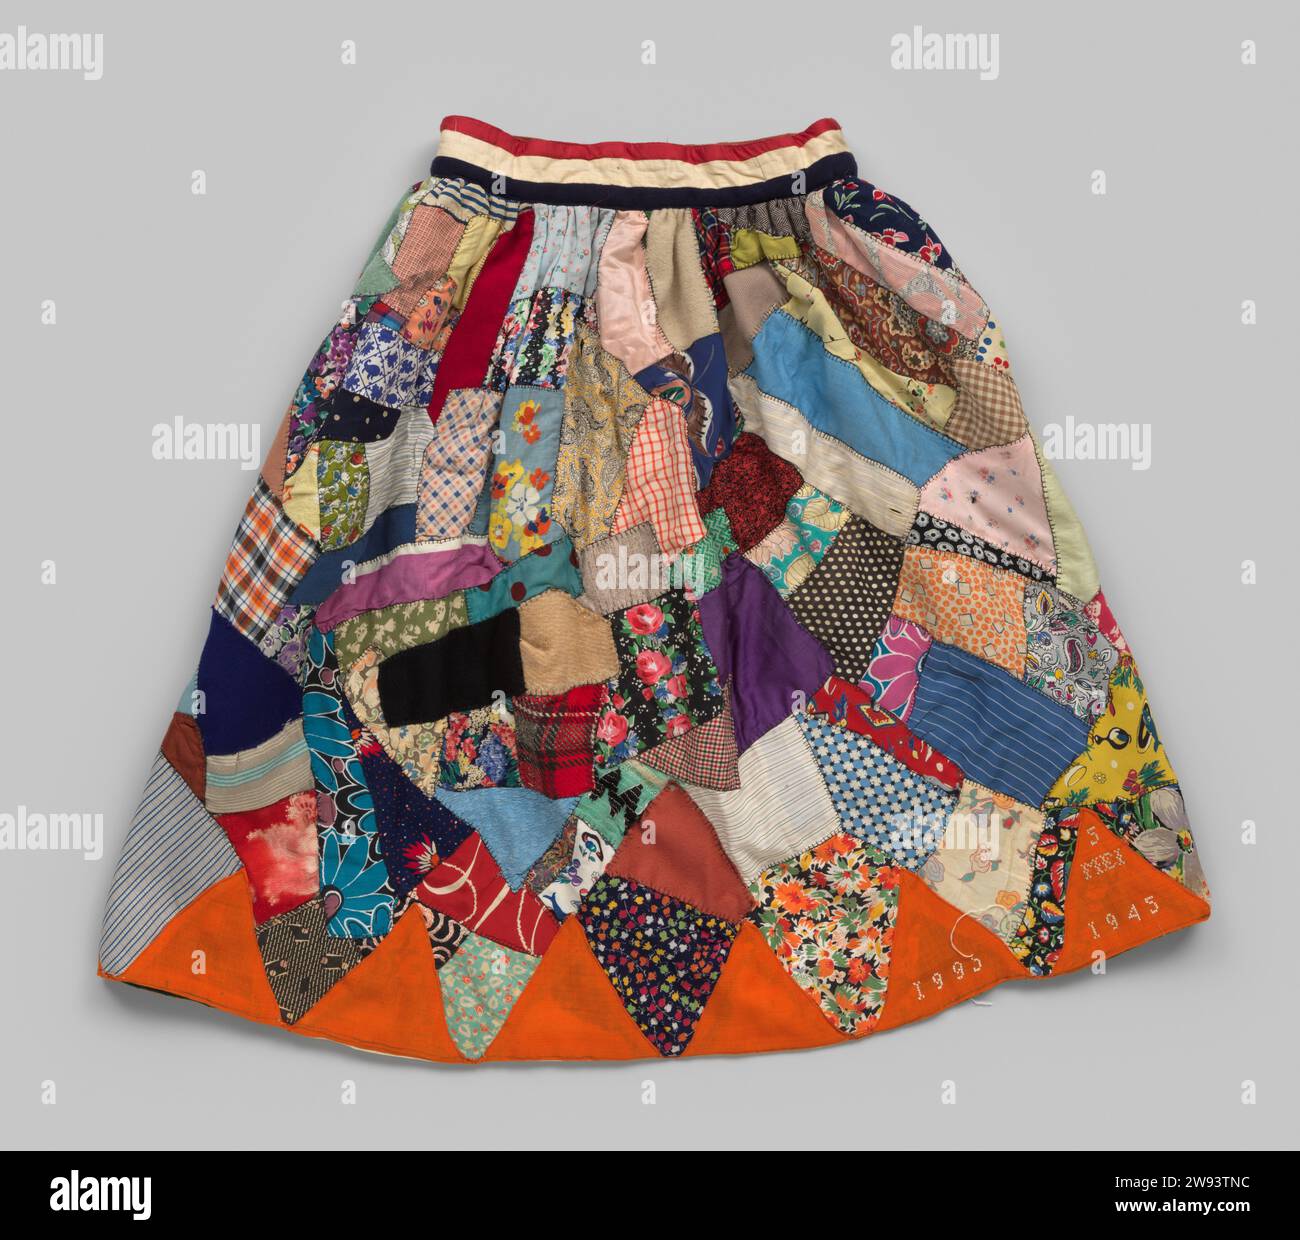 National party skirt Mrs. Brand, 1945 - 1951  Skirt with red, white, blue waistband and orange triangles made from a pennant at the bottom. The skirt is sewn on an old green curtain. The patches of fabric come from various items of clothing from the family of Mrs. Brand and old curtains, blankets etc. Target textile materials   Rotterdam Stock Photo